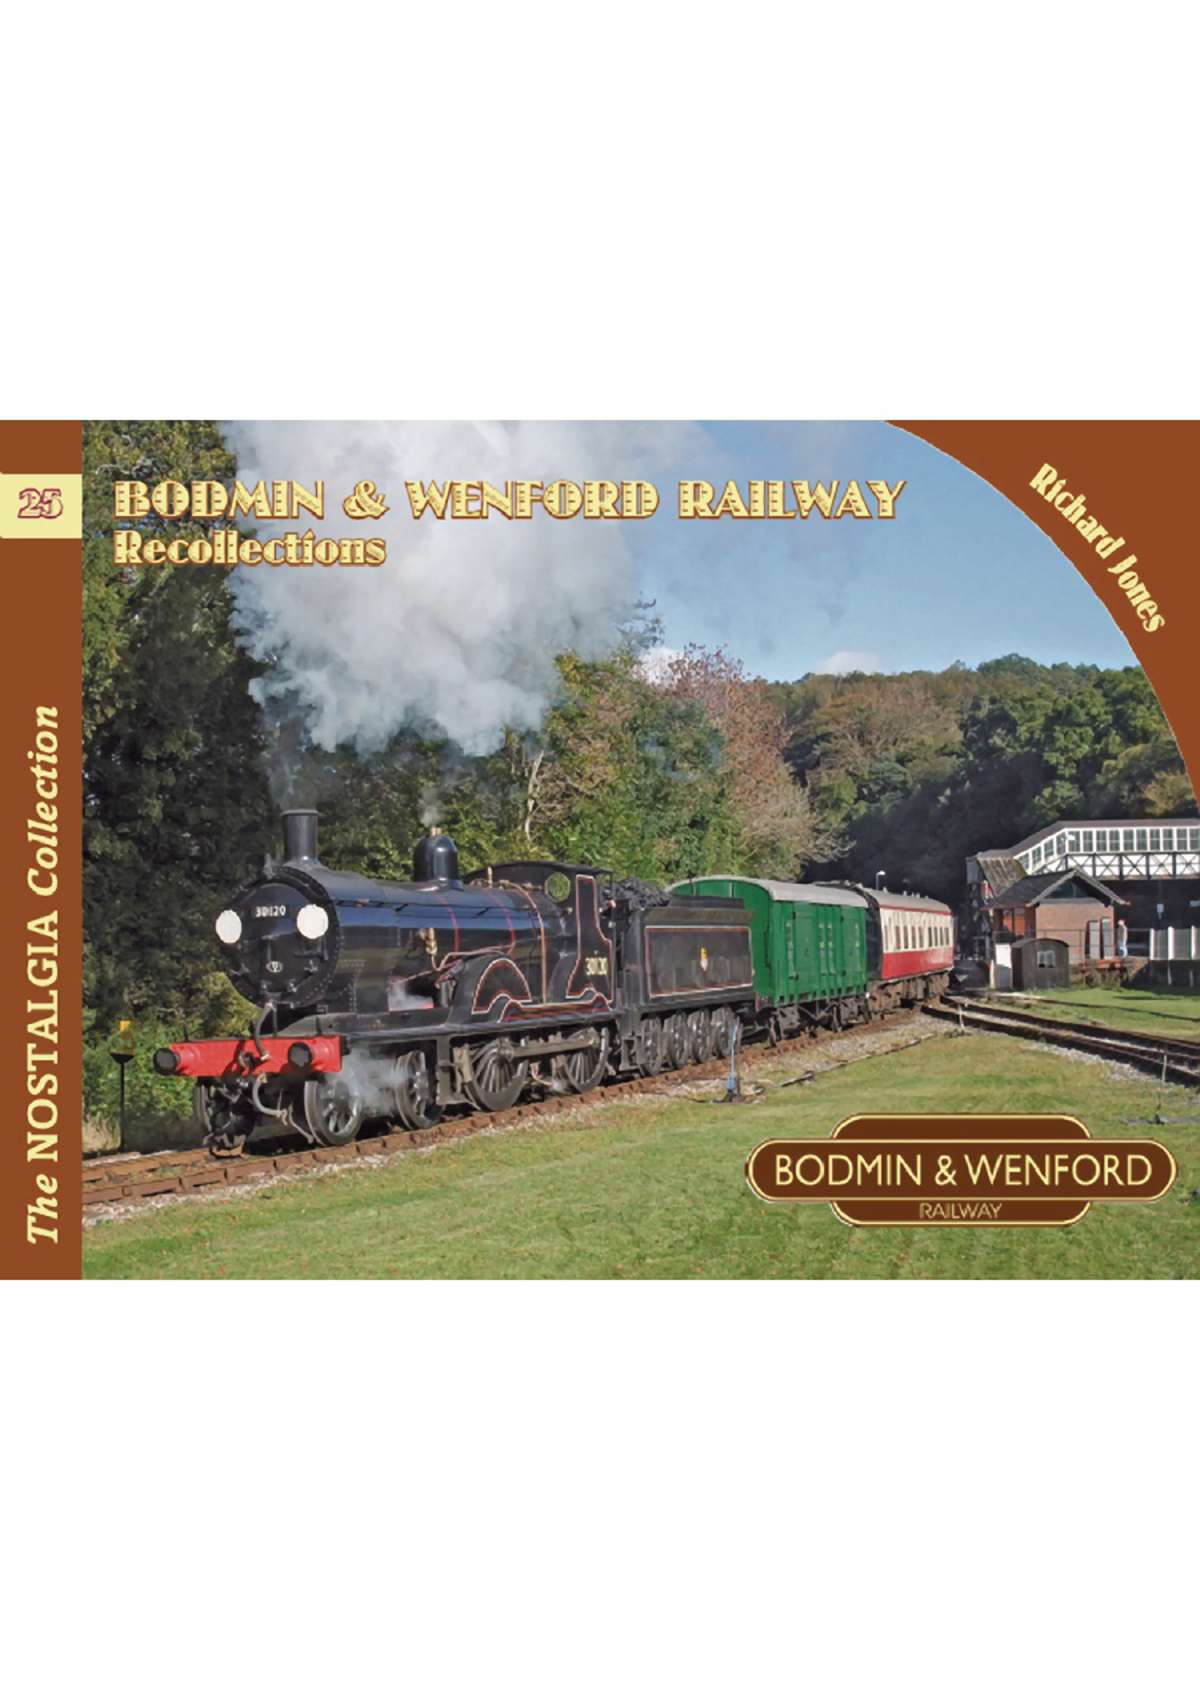 3900 - Vol 25: Bodmin & Wenford Railway Recollections